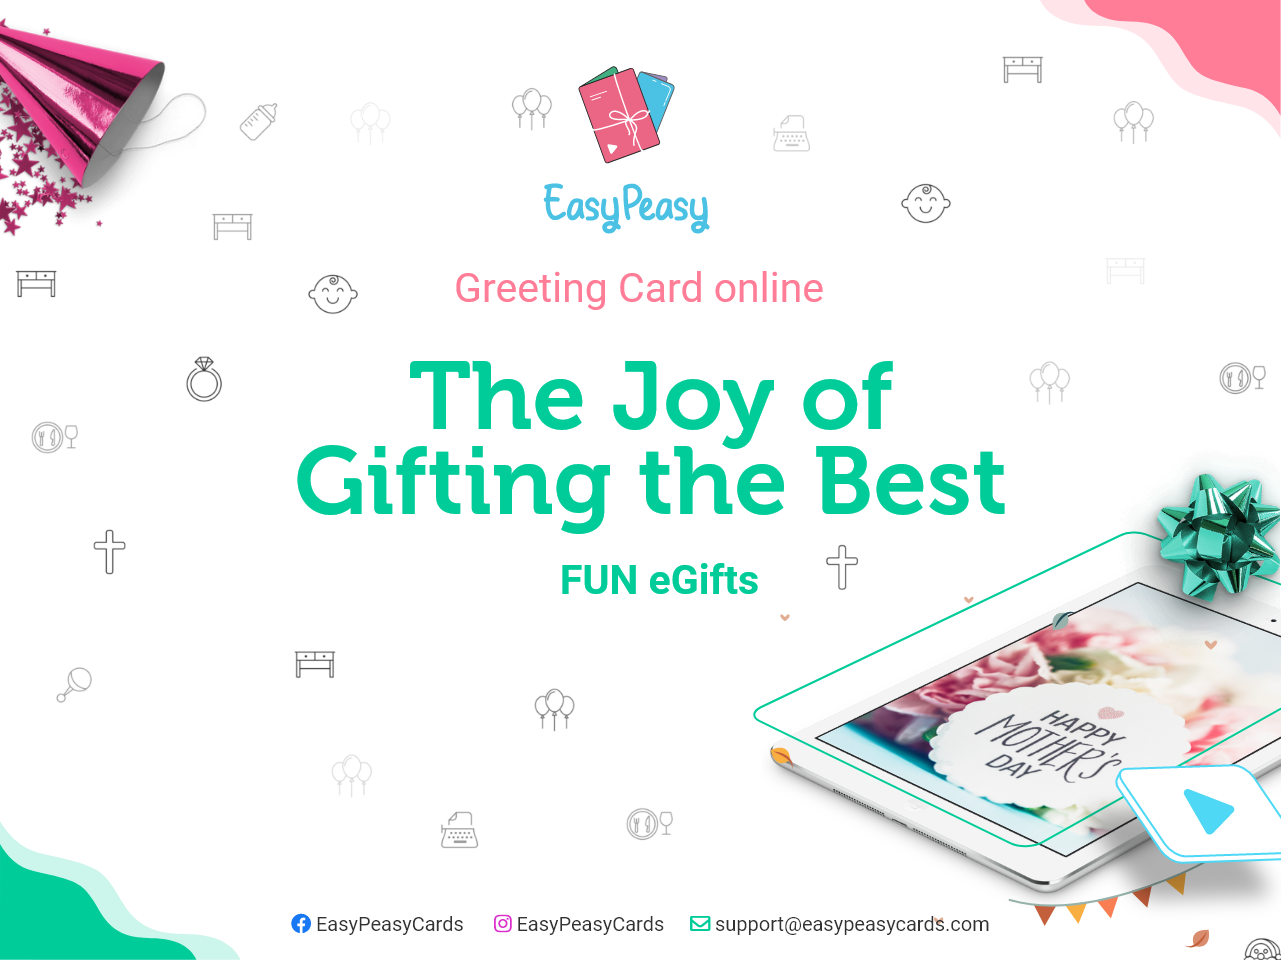 Easy Peasy – Revolutionary Video Greeting Card App That Saves Money and Time. Gifting and Greetings for the 21st Century.